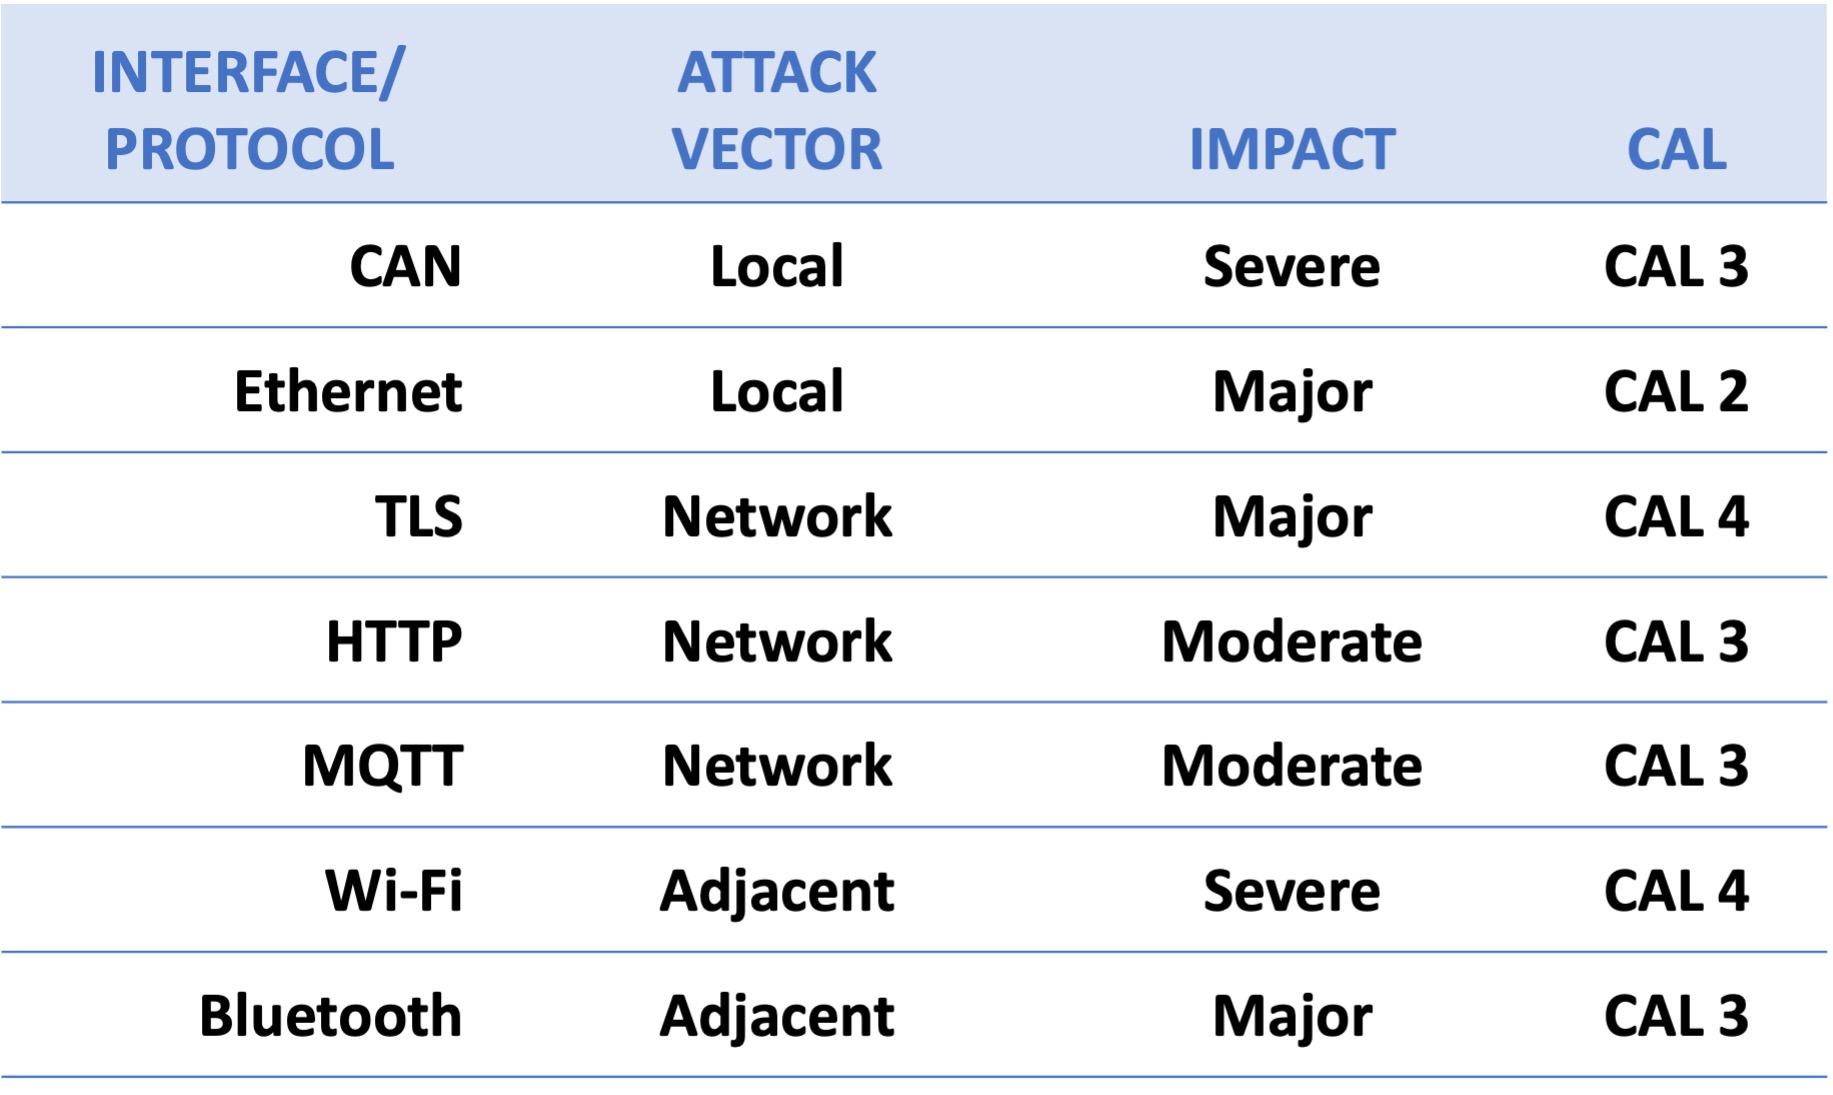 high-risk interfaces | Synopsys